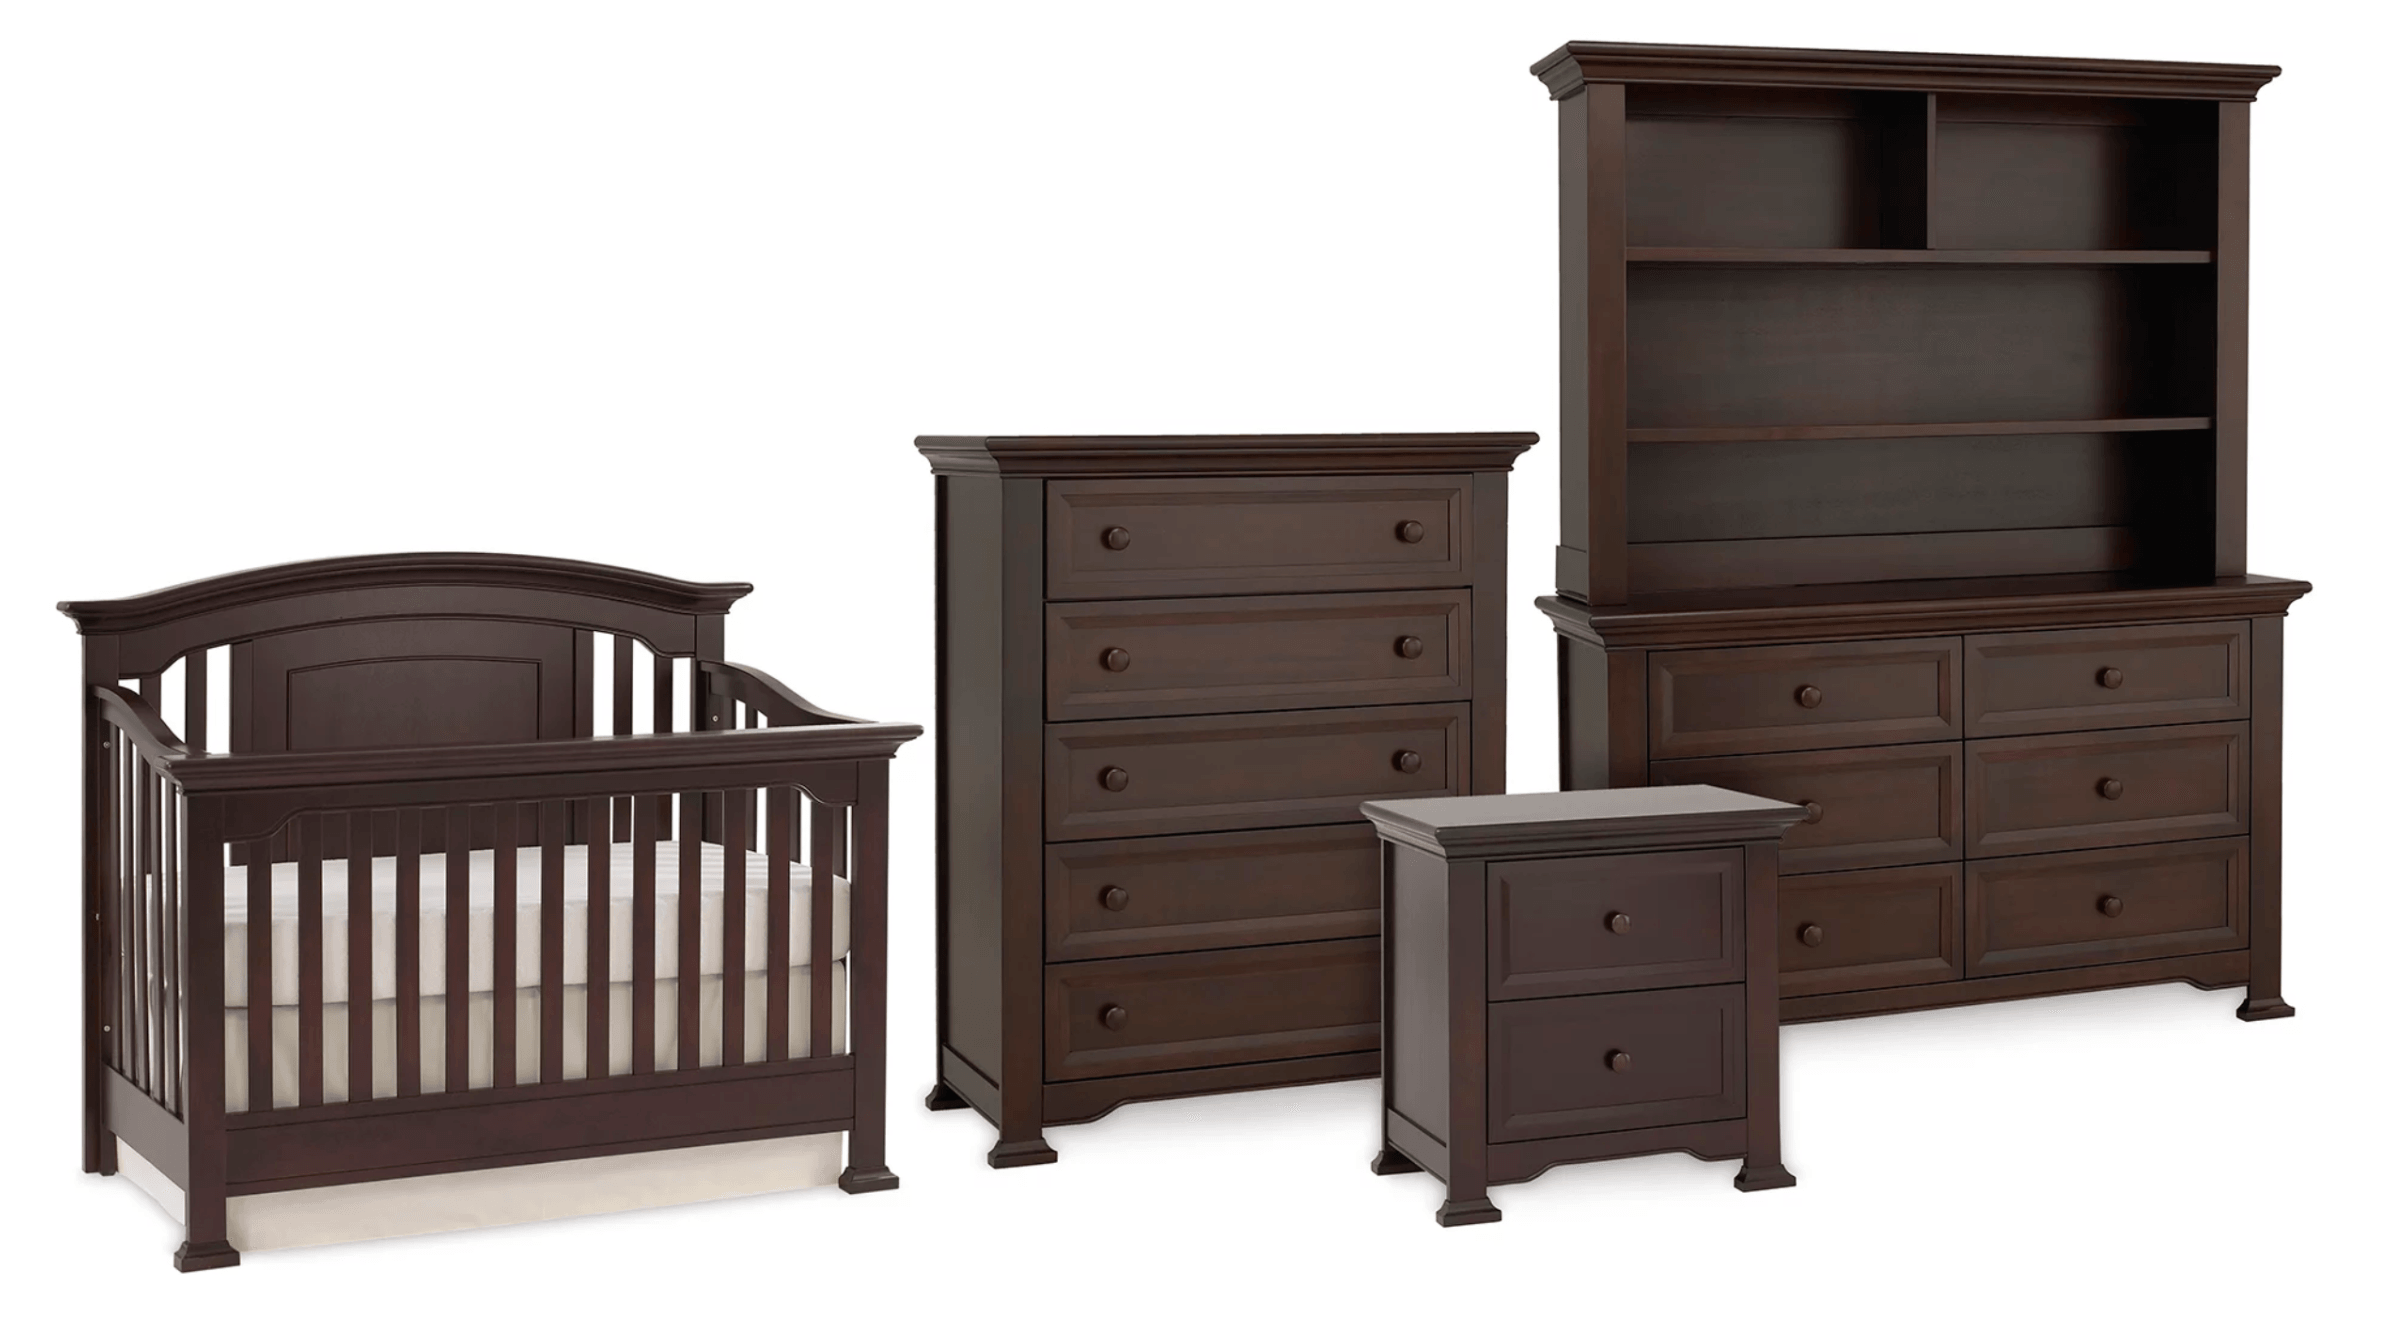 Nursery Furniture Collection in Espresso - The Baby's Room